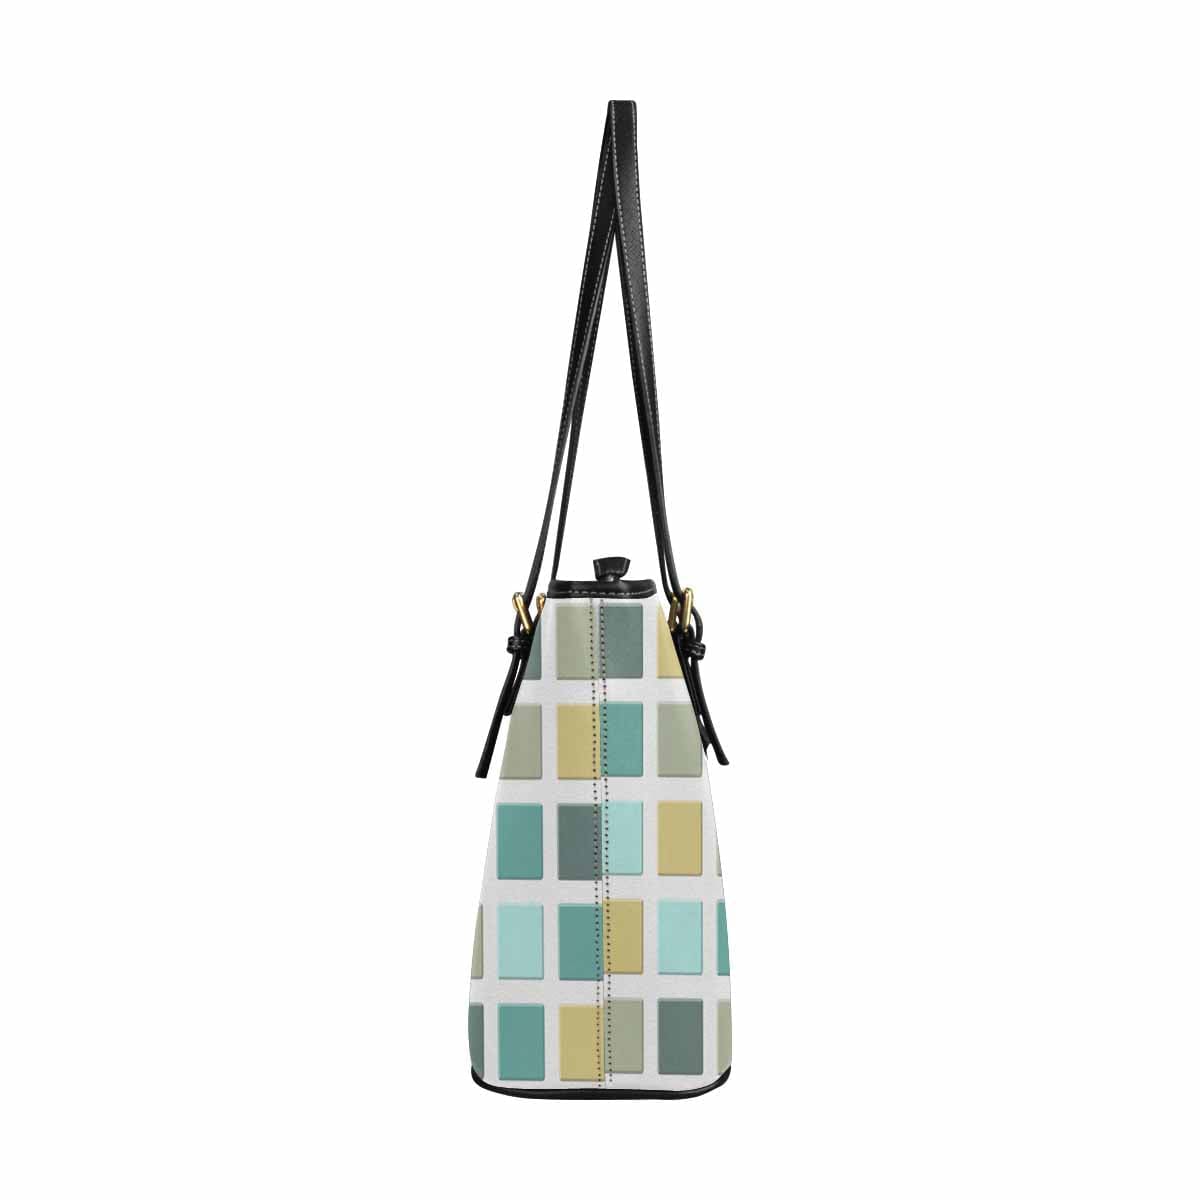 Large Leather Tote Shoulder Bag - Mosaic Tiles Green - Bags | Leather Tote Bags